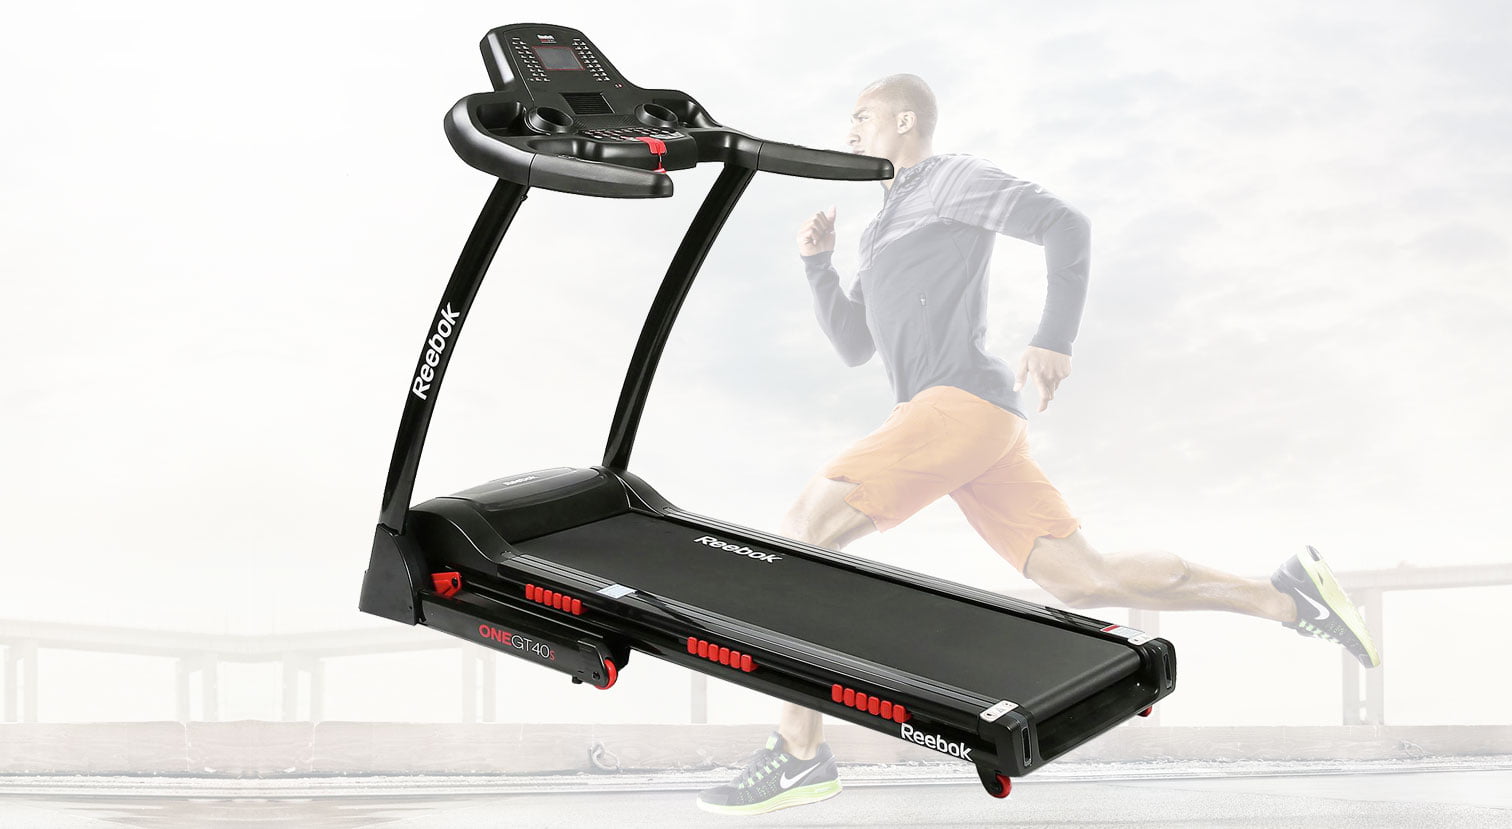 GT40s Treadmill Review - Gym Review - Reviews of the Latest Equipment